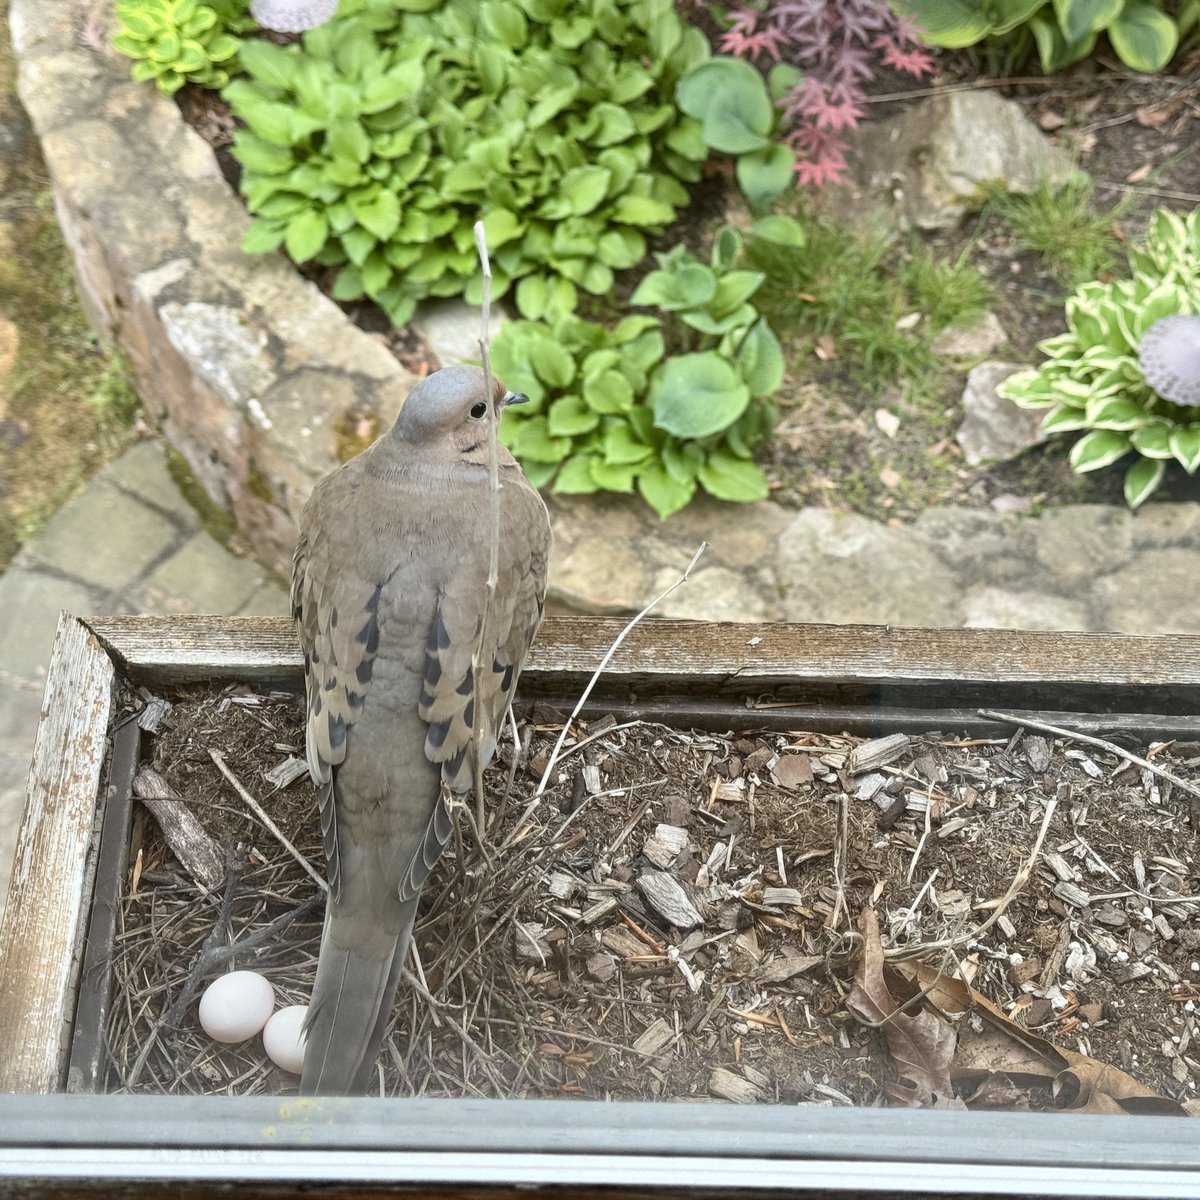 The eggs are visible for three 1st time! Our little mourning dove is up and on mom duty early today outside our window. #nature